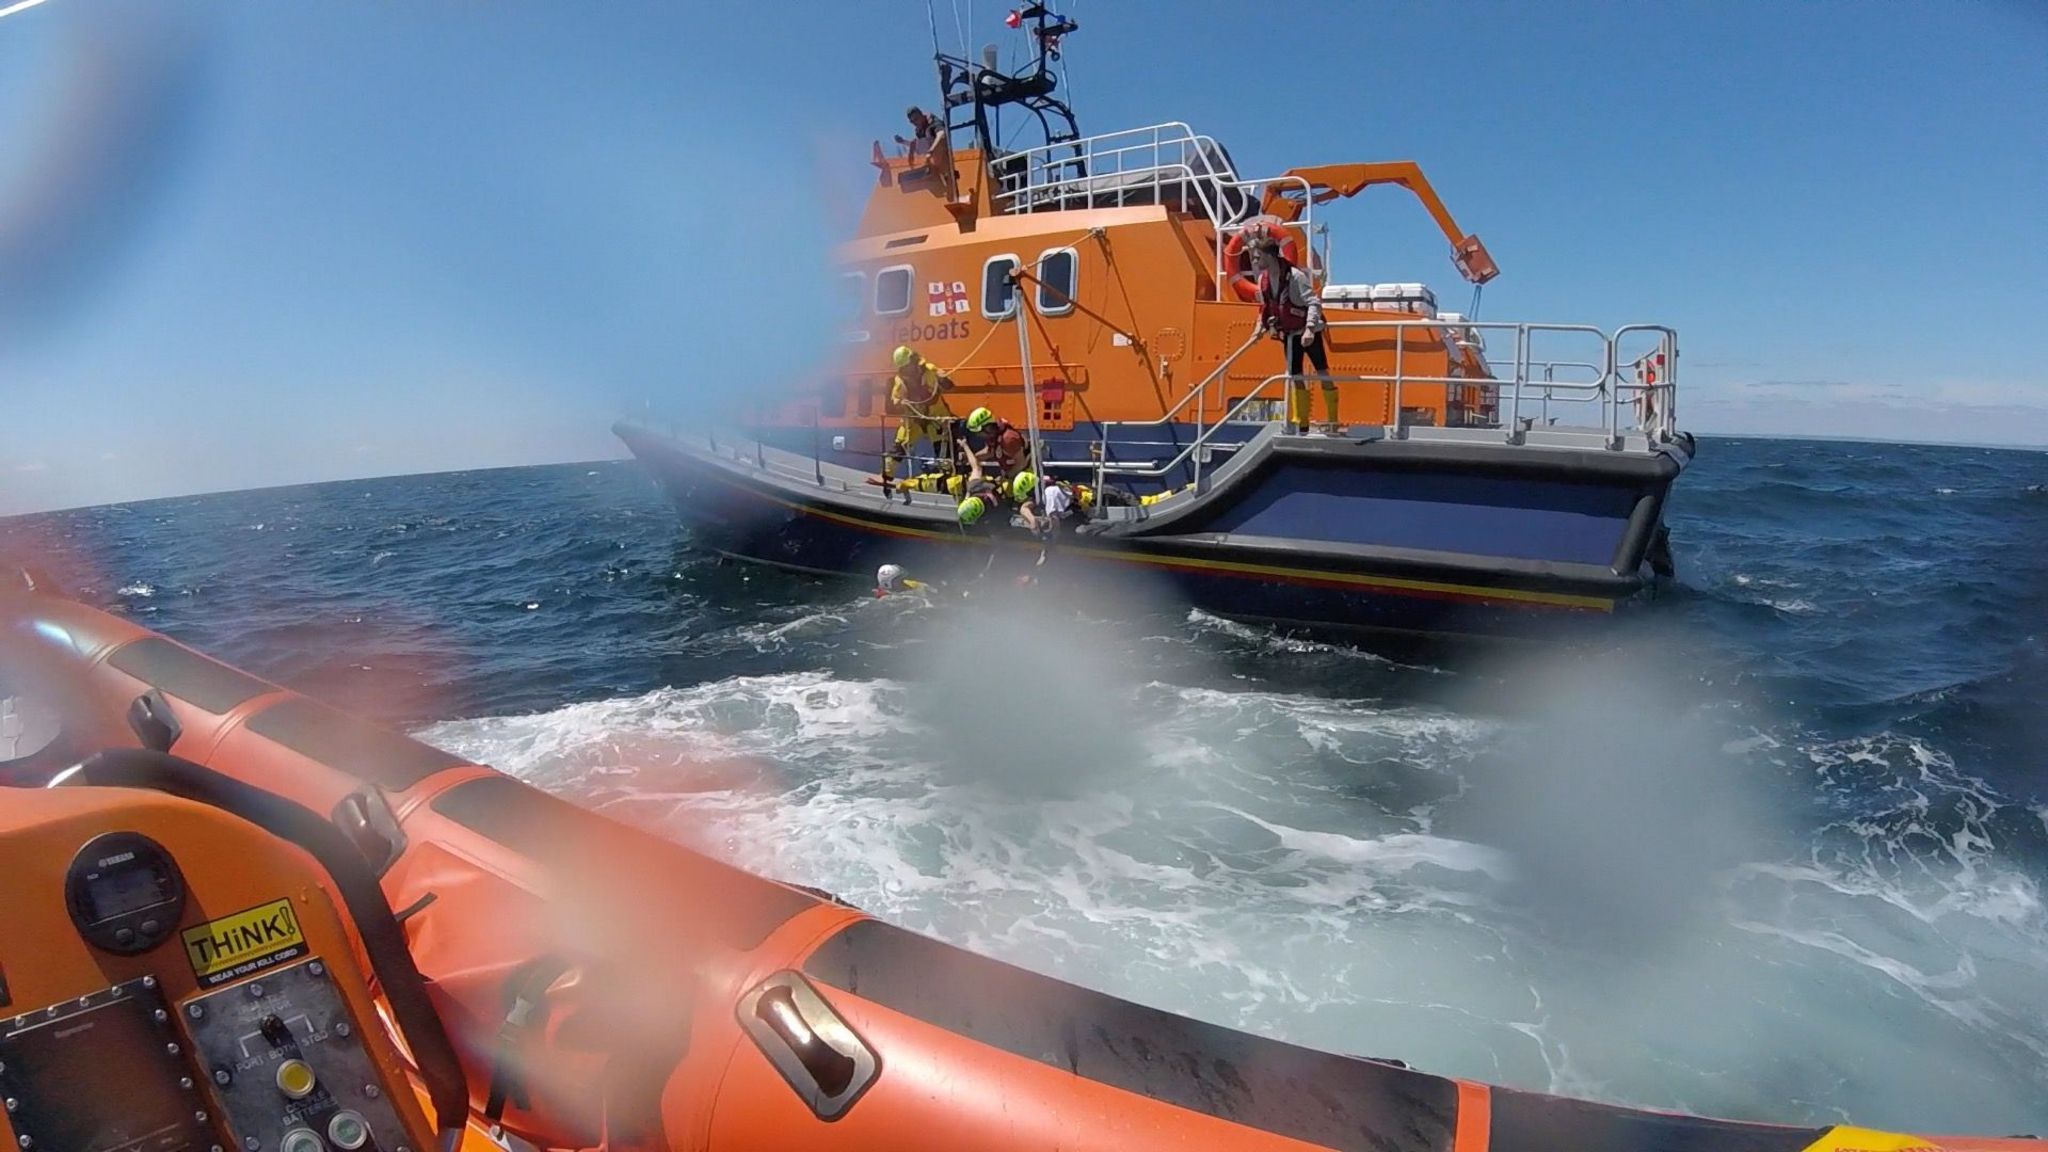 RNLI rescuing diver near the Eddystone Lighthouse